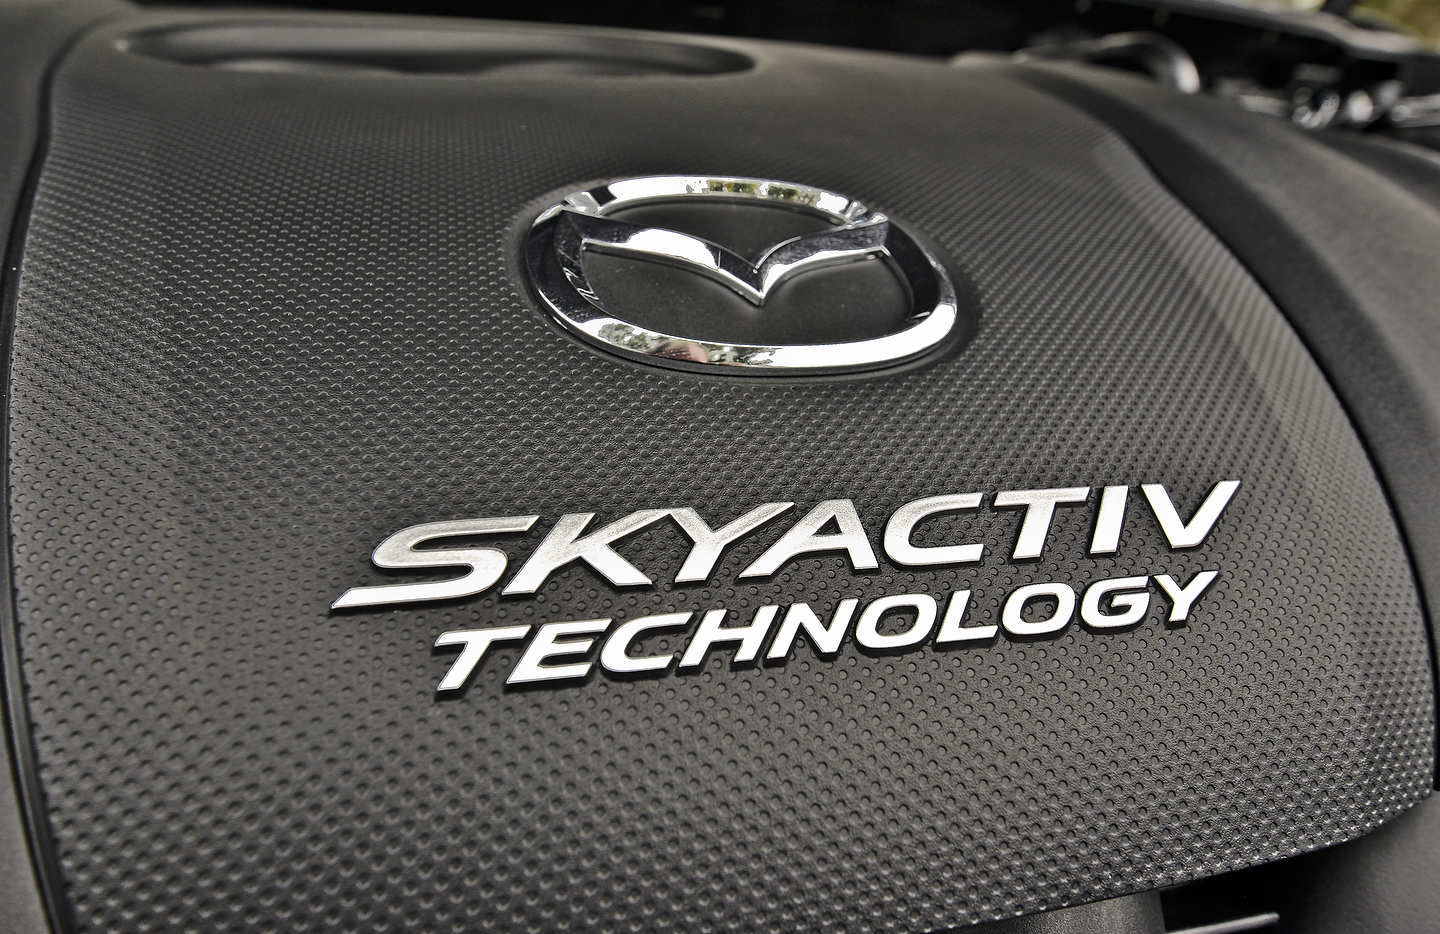 Why are SKYACTIV engines so efficient?